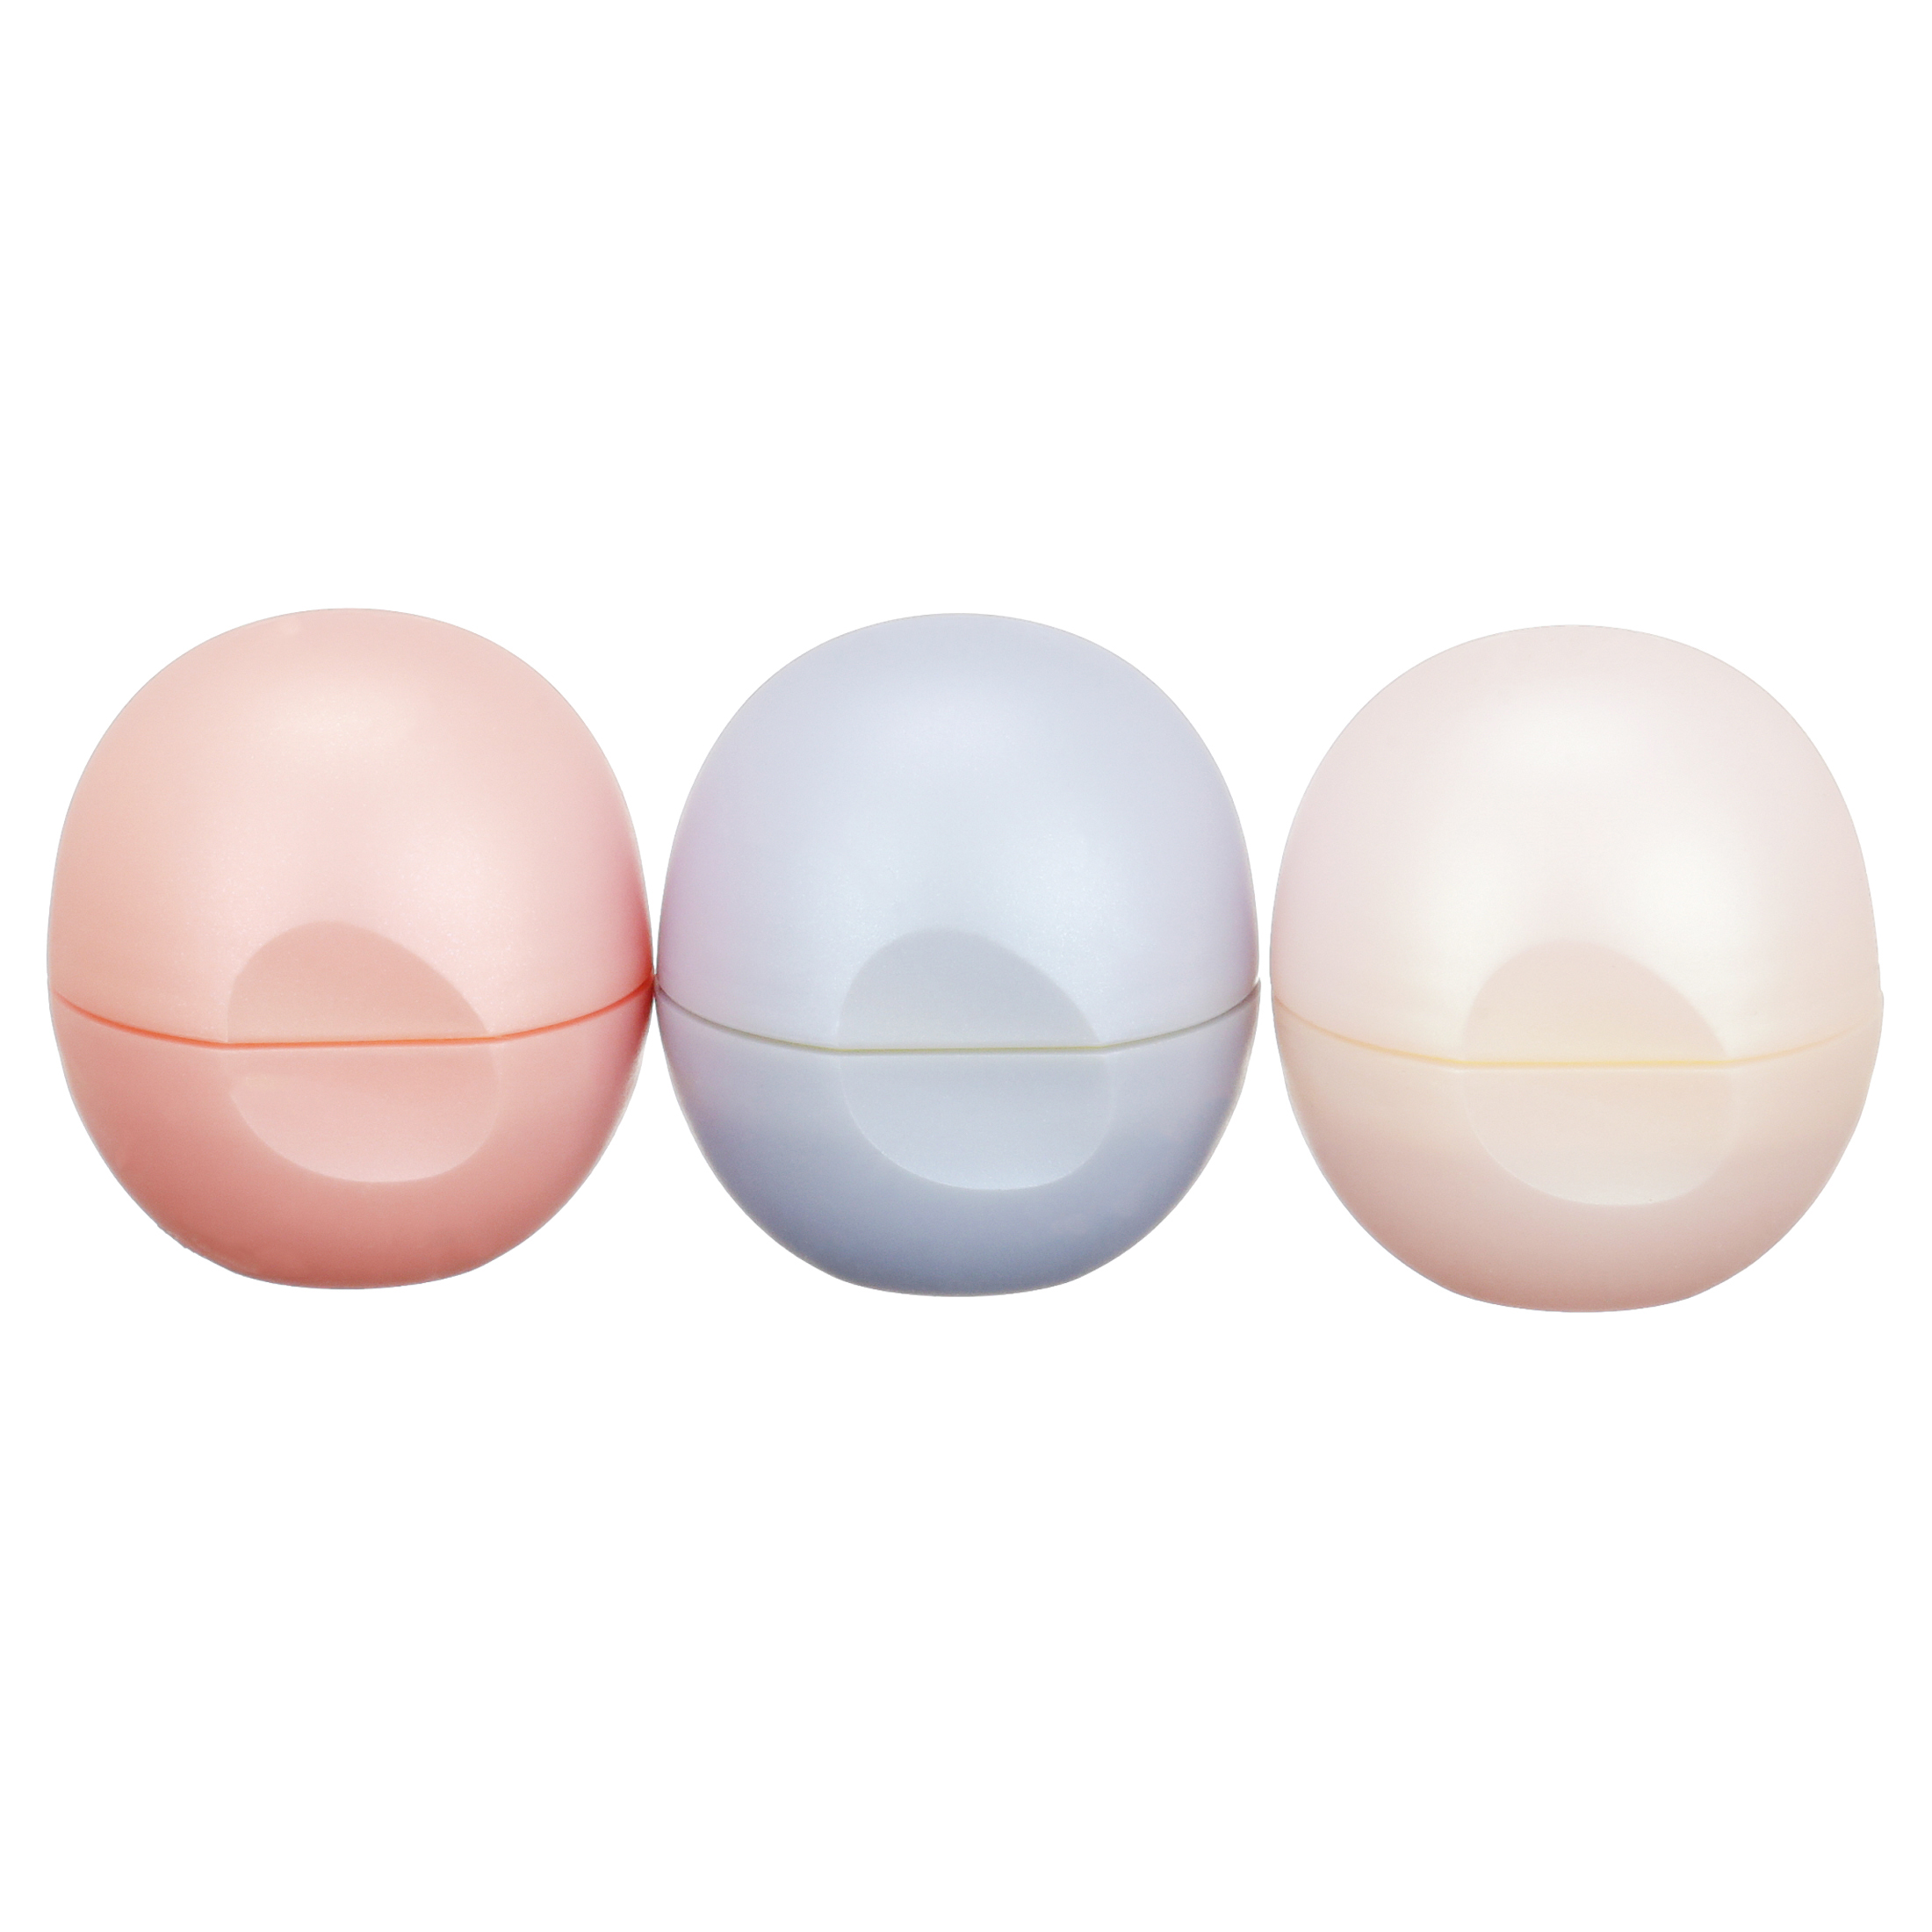 ($7.99 Value) eos Holiday Lip Balm Sphere , Cotton Candy Snow, Caramel Brulée Sleigh and Champagne Pop , Moisuturzing Shea Butter for Chapped Lips , 3 Count - image 4 of 9